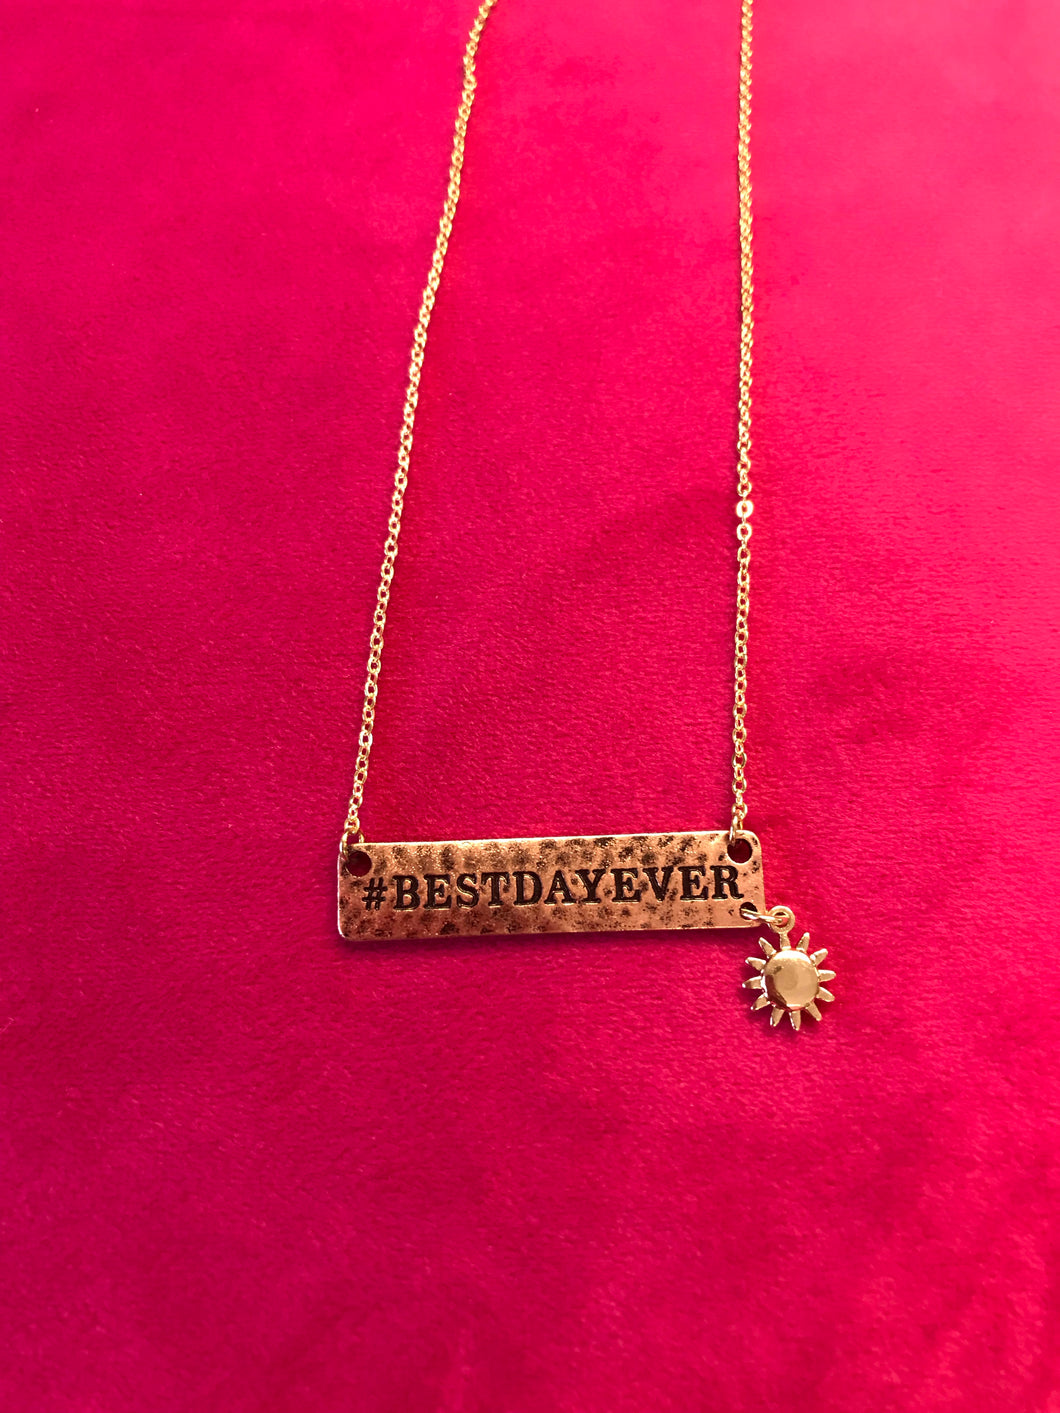 Best Day Ever Necklace